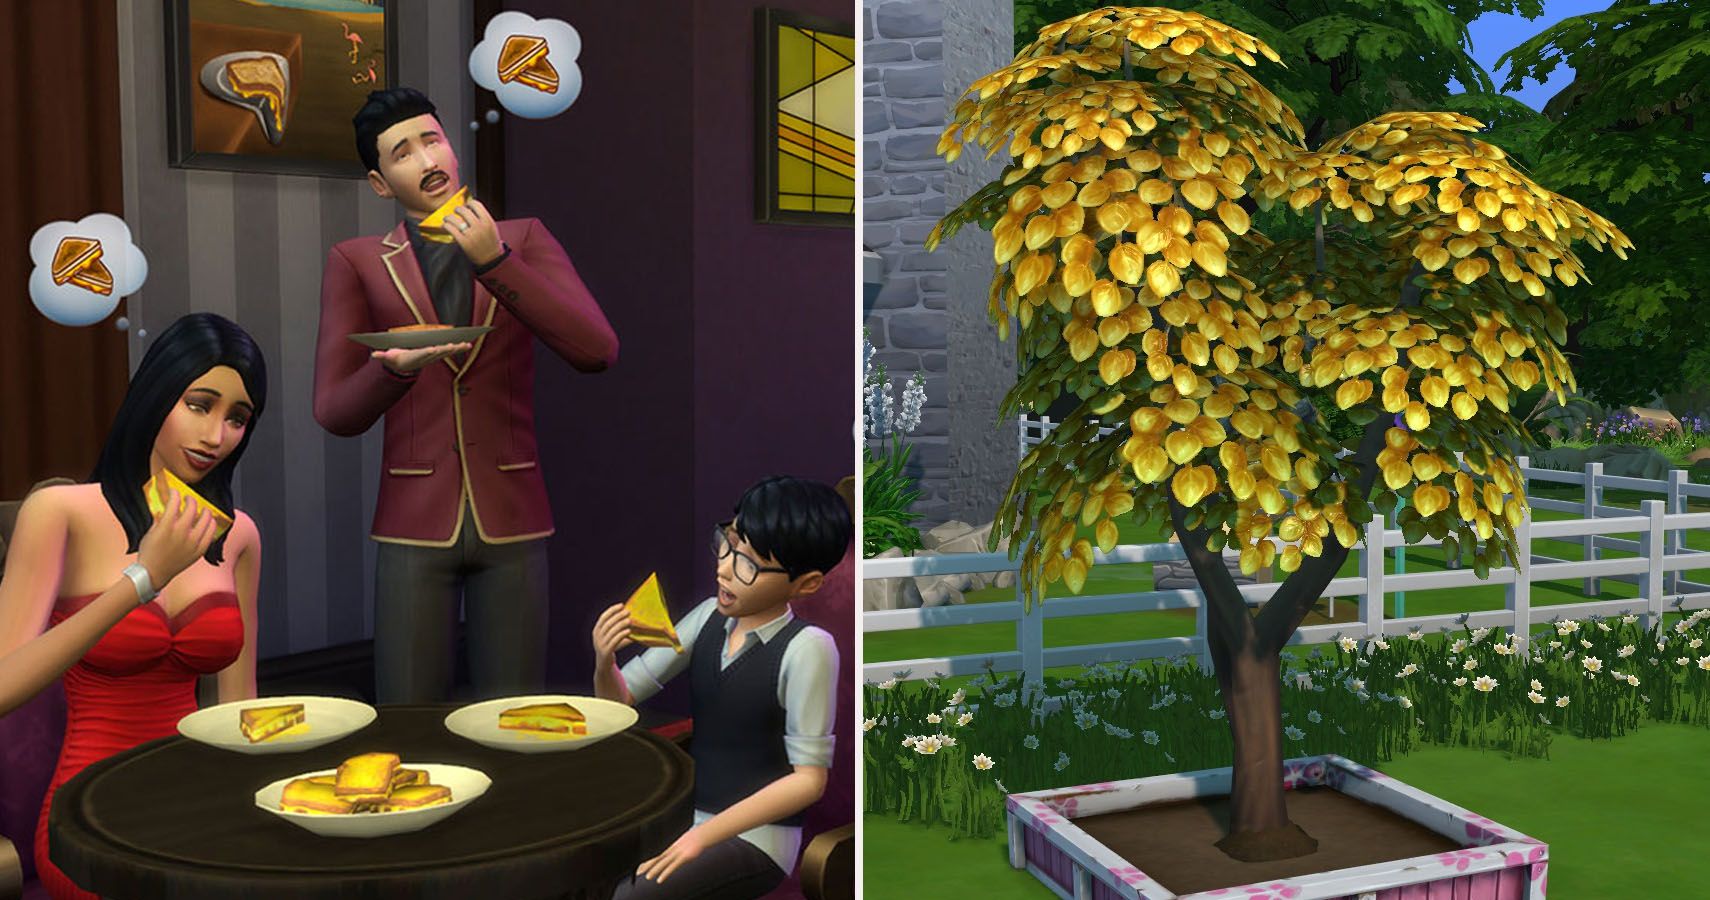 The Sims 4 15 Secrets You Never Knew And 5 Cheats To Help You Out